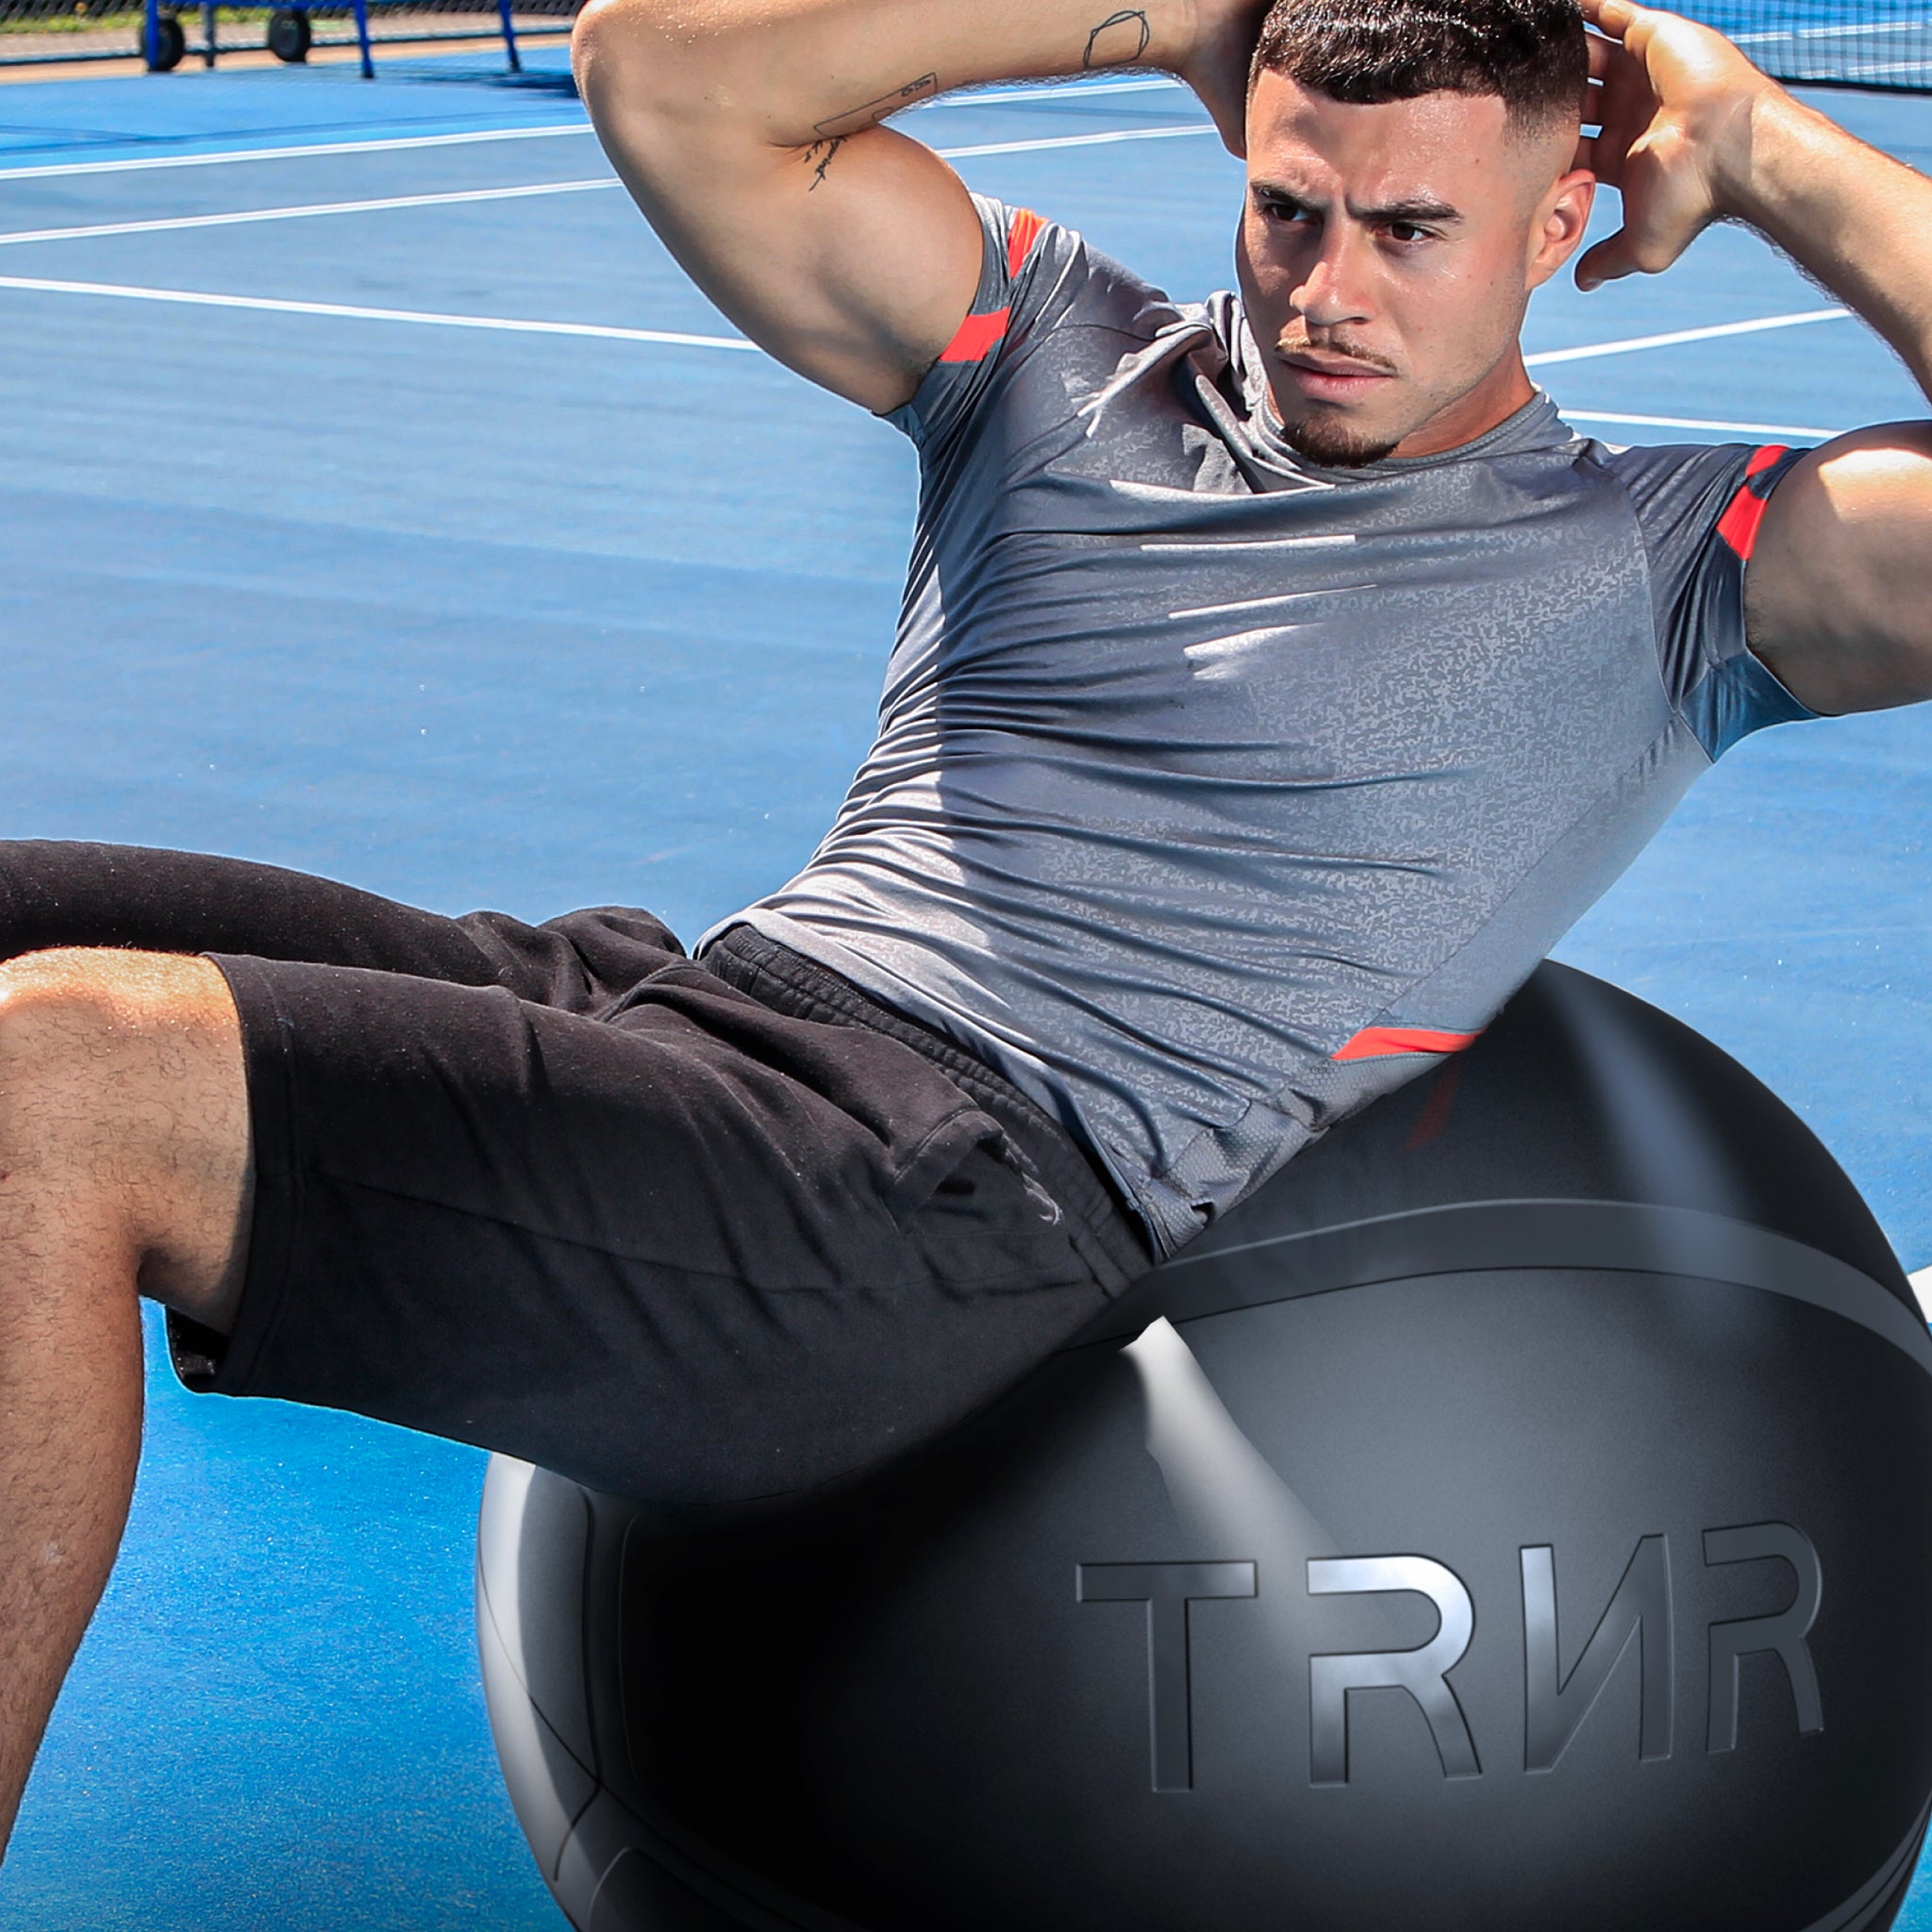 Top 5 Reasons Why You Should Use a Gym Ball